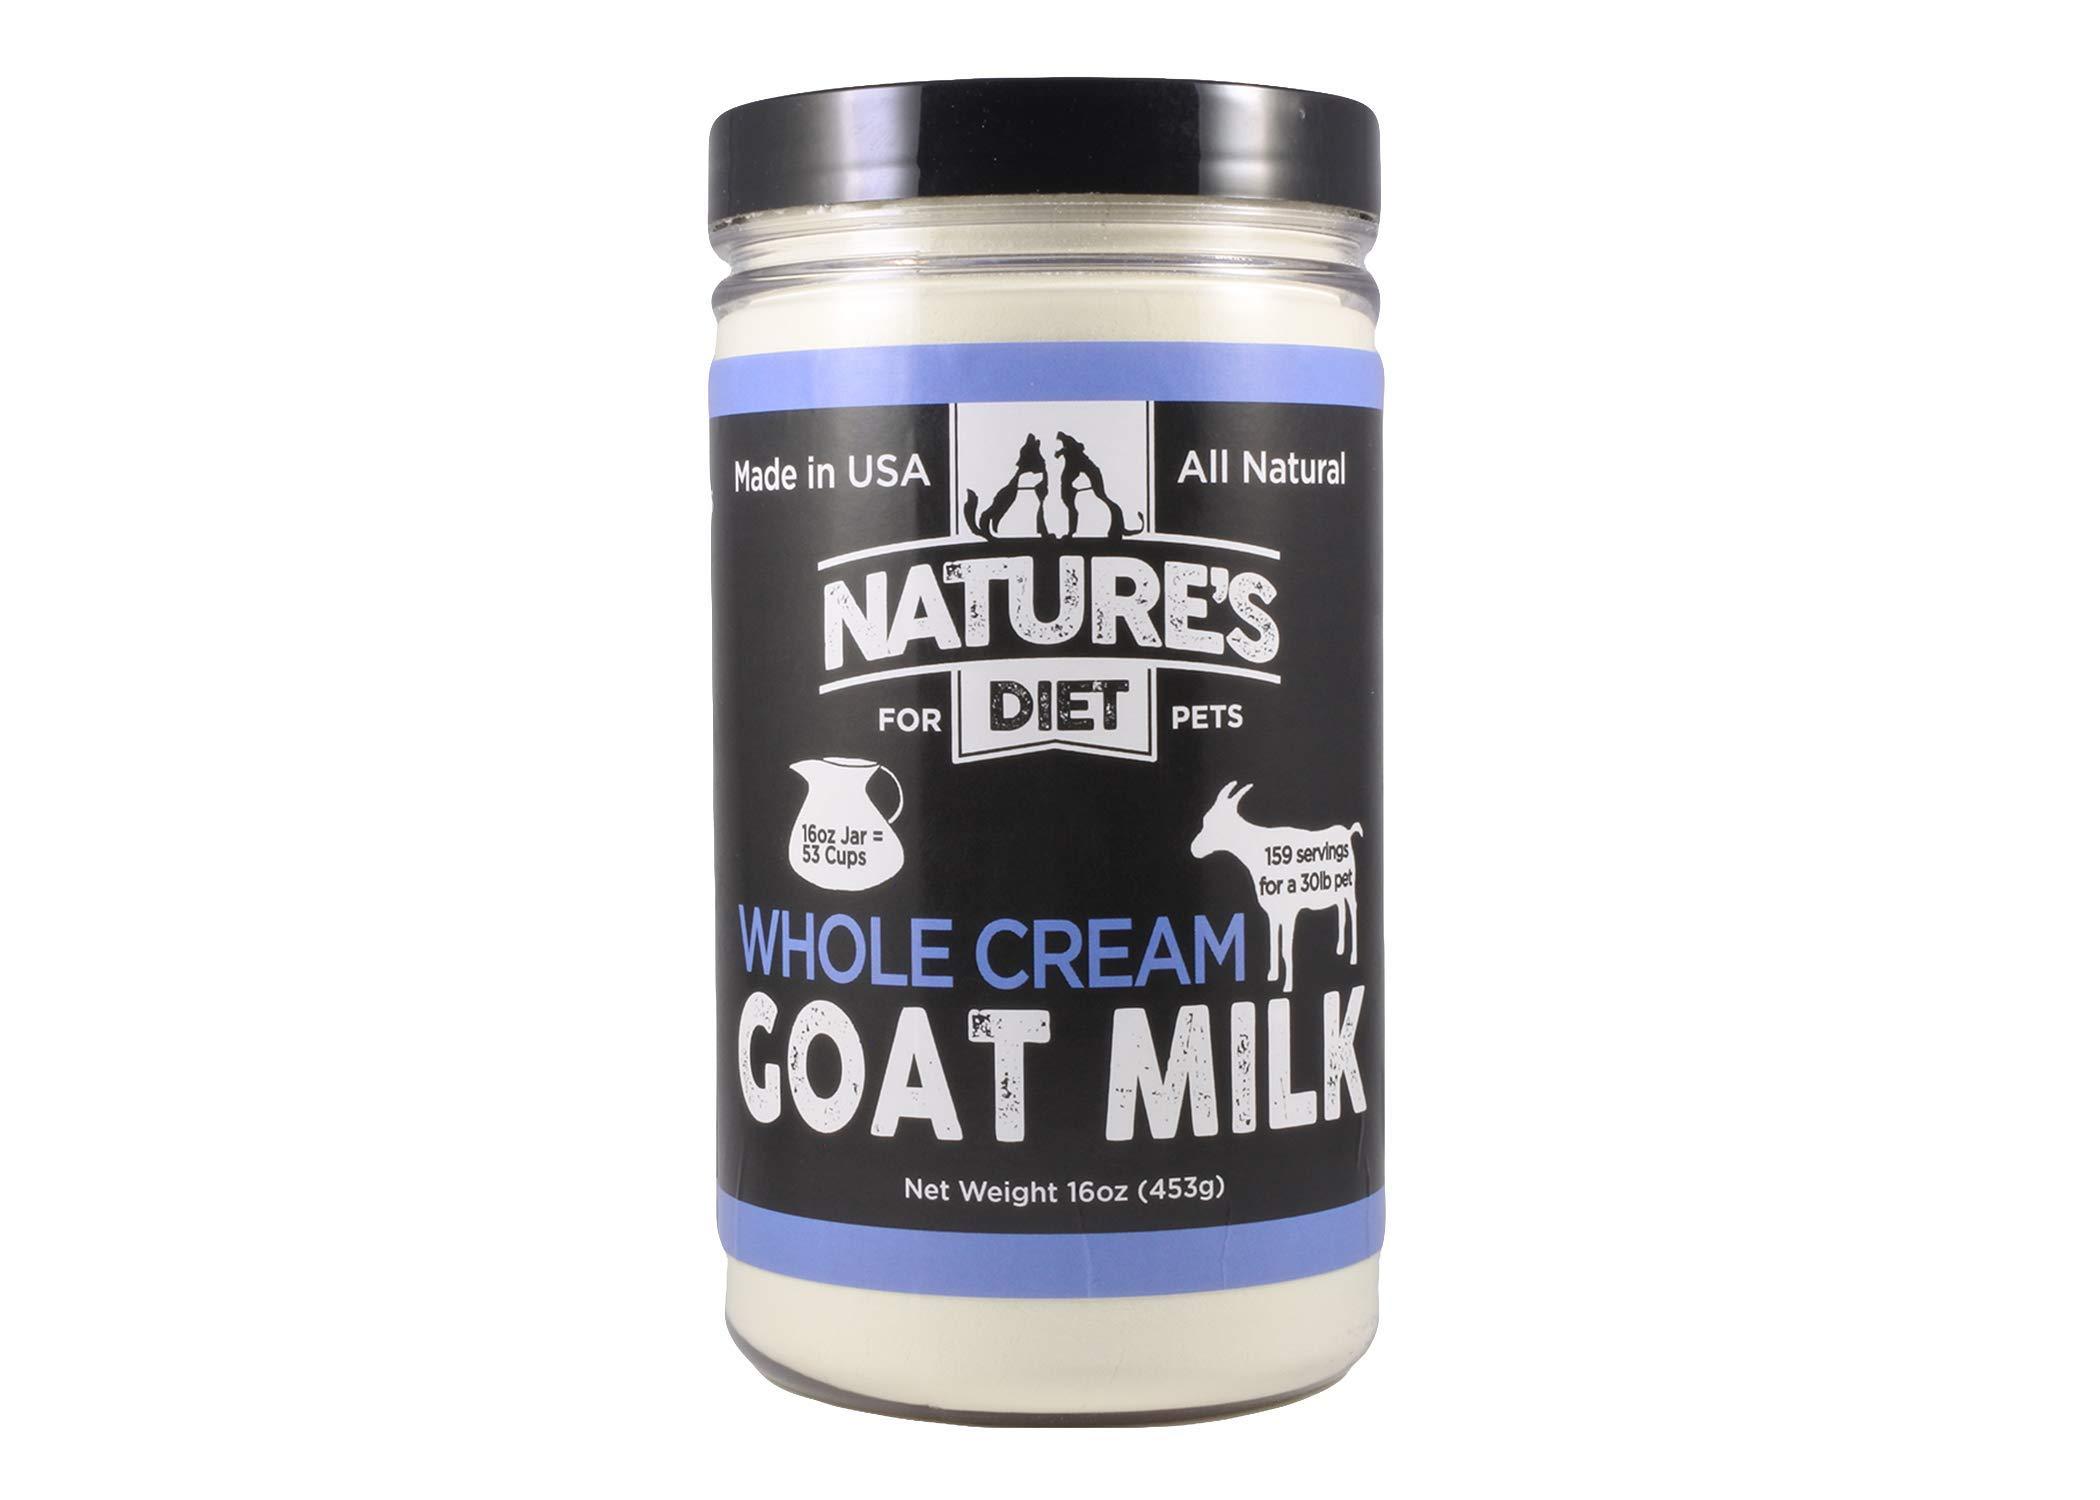 Nature's Diet Pet Dried Whole Cream Goat Milk for use as High Protein, Hypoallergenic Digestion, Anti-inflammatory Powdered Instant Meal Topper (16 oz = 53 Cups or 159 Servings)